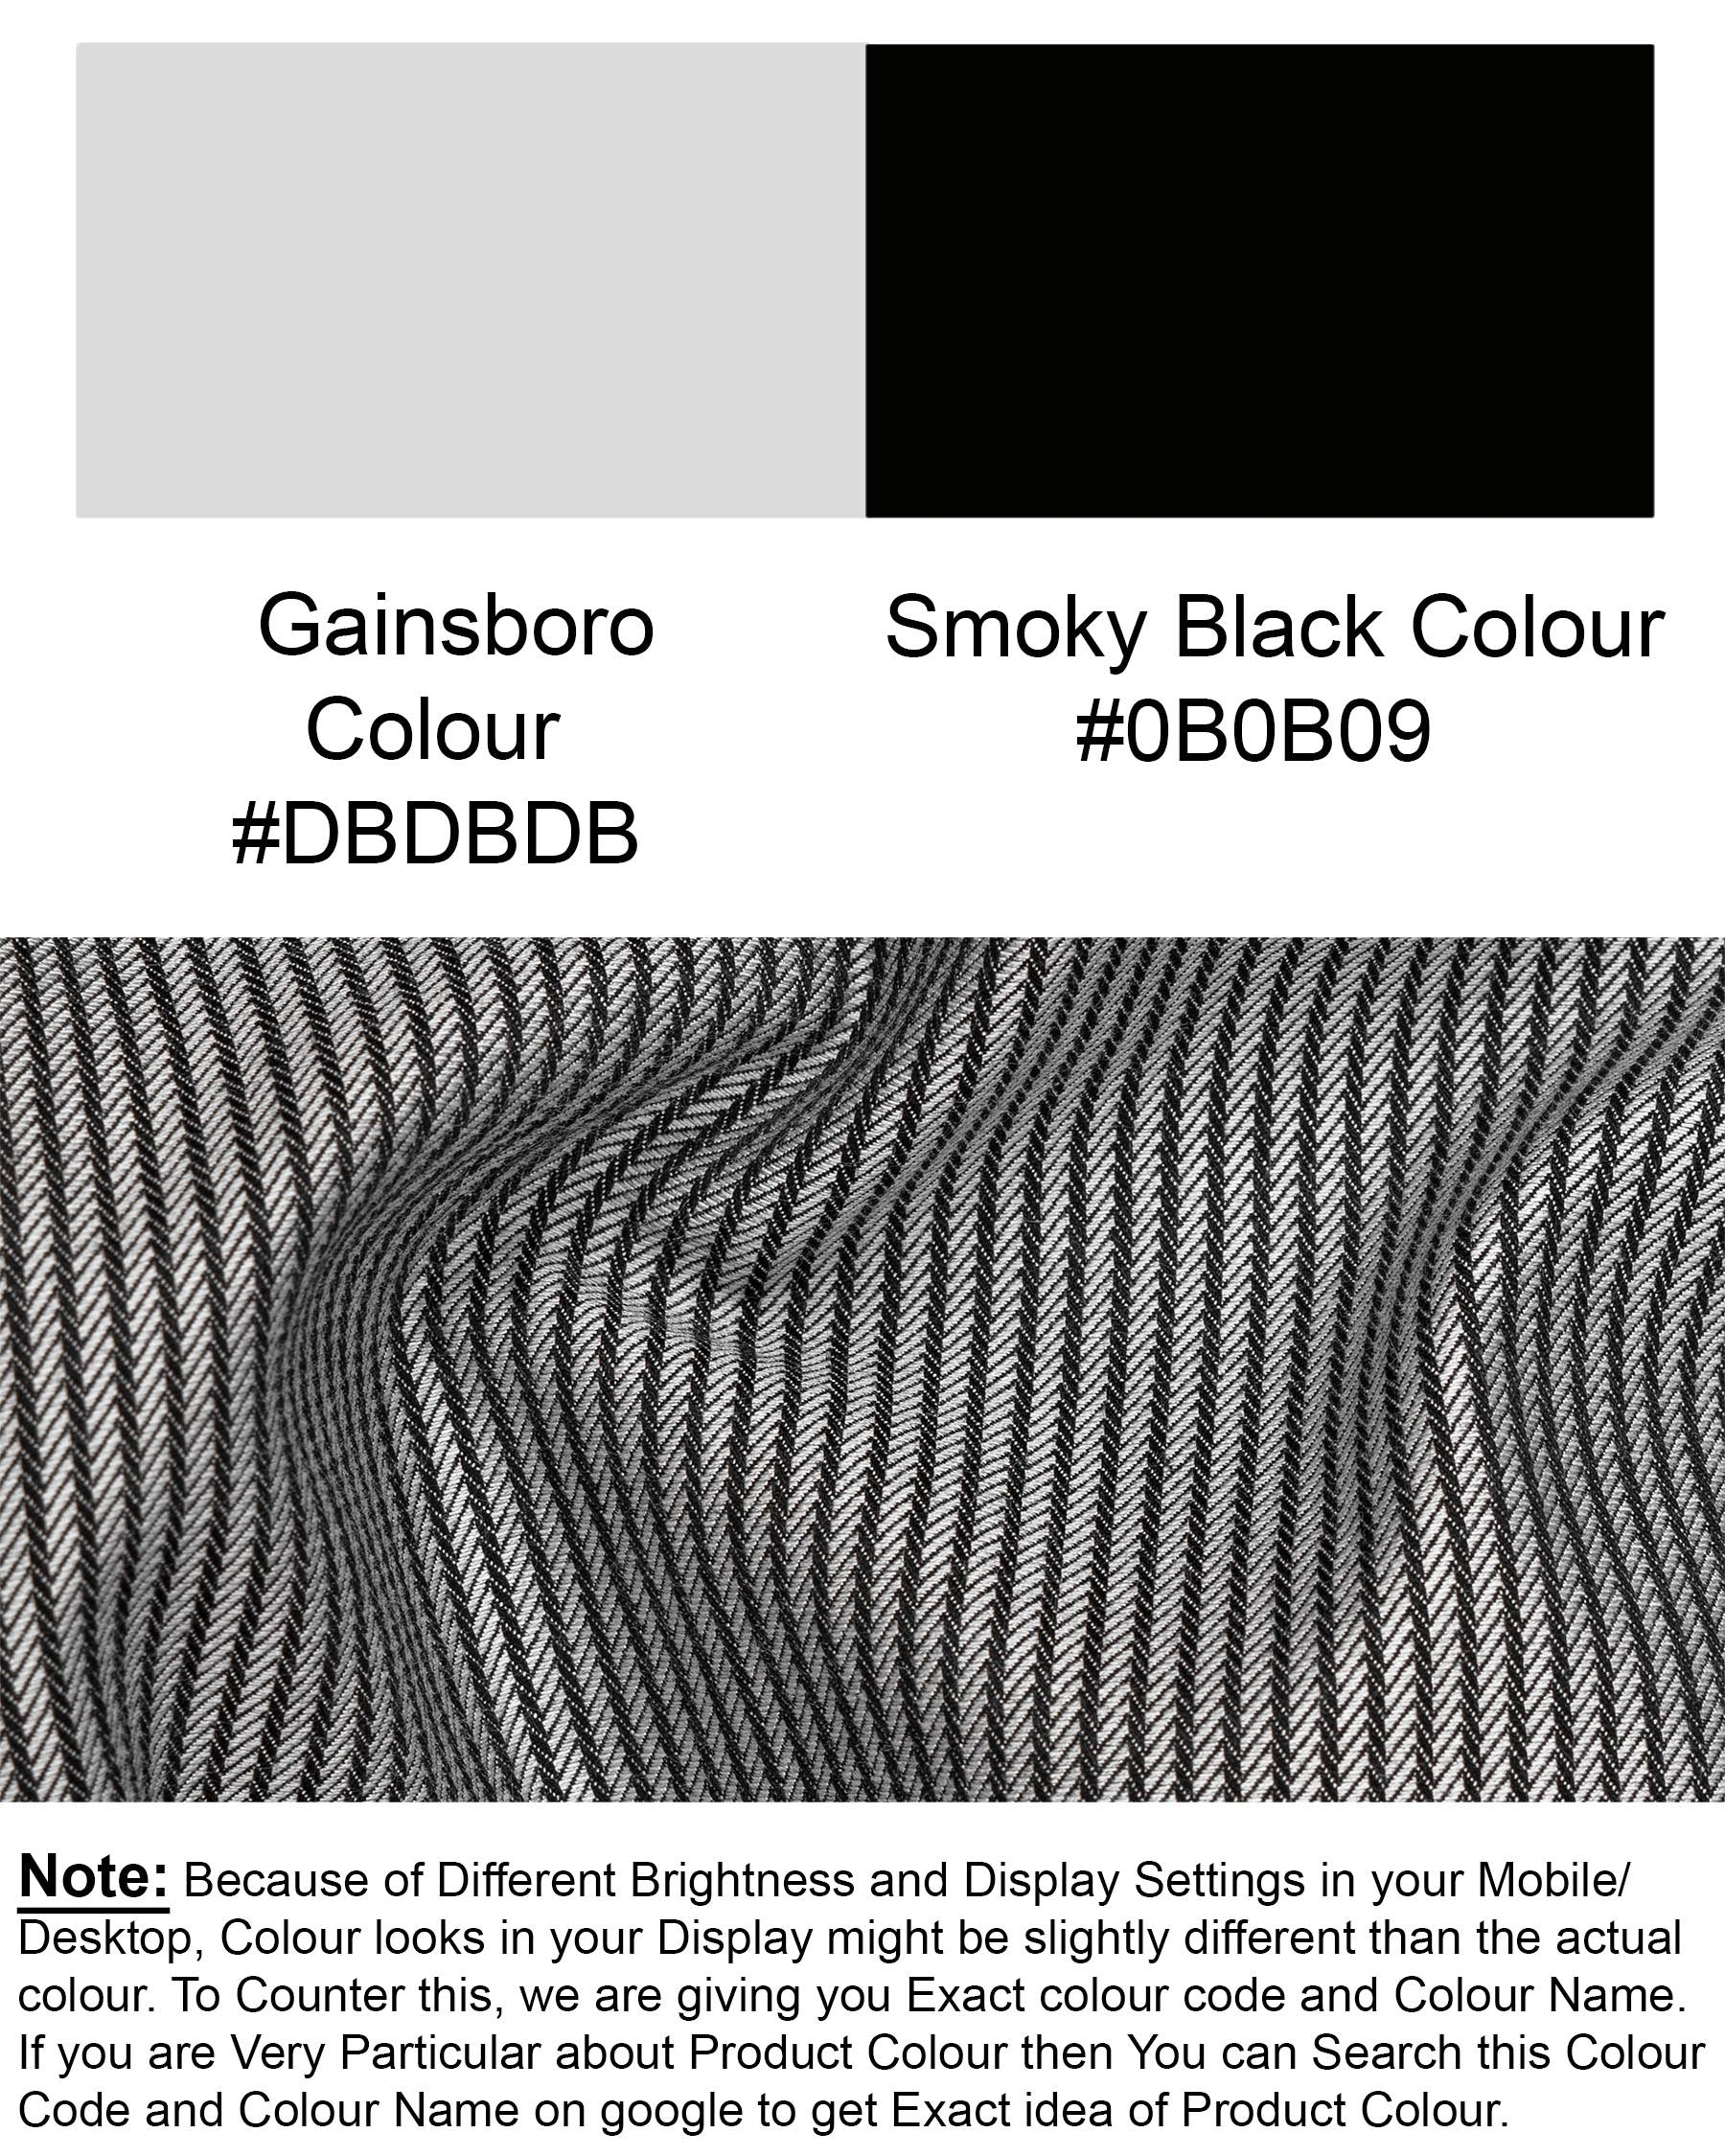 Gainsboro Gray Striped Double Breasted Suit ST1734-DB-36, ST1734-DB-38, ST1734-DB-40, ST1734-DB-42, ST1734-DB-44, ST1734-DB-46, ST1734-DB-48, ST1734-DB-50, ST1734-DB-52, ST1734-DB-54, ST1734-DB-56, ST1734-DB-58, ST1734-DB-60